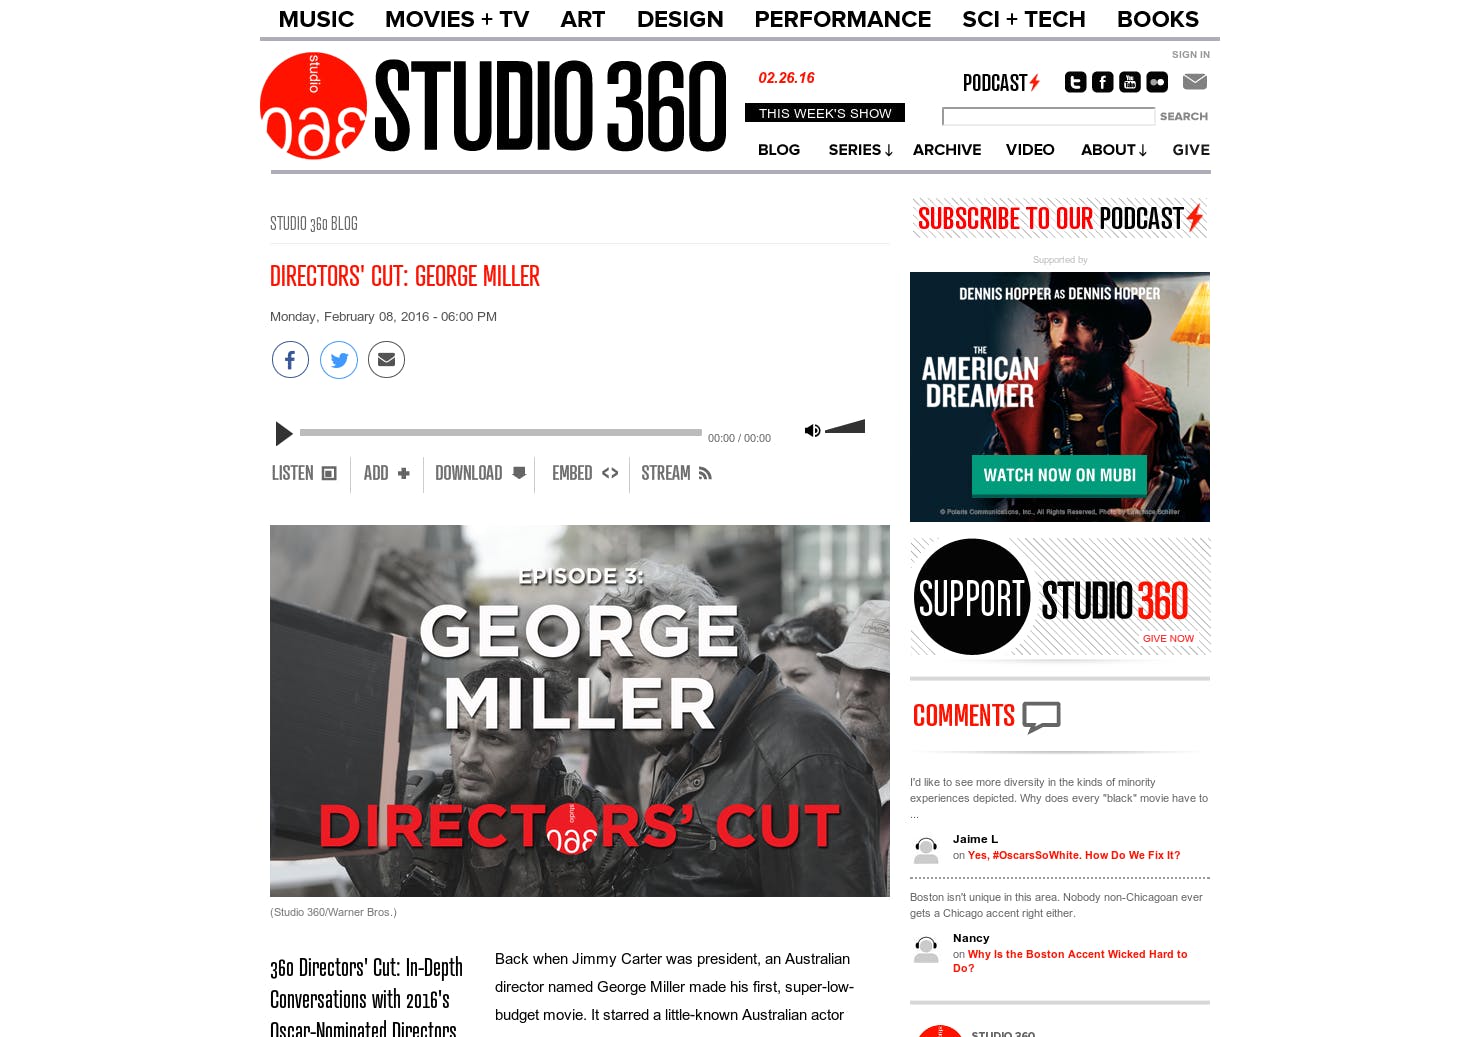 Studio 360 - Classical Music for Bros & A New Symbol for the South media 1